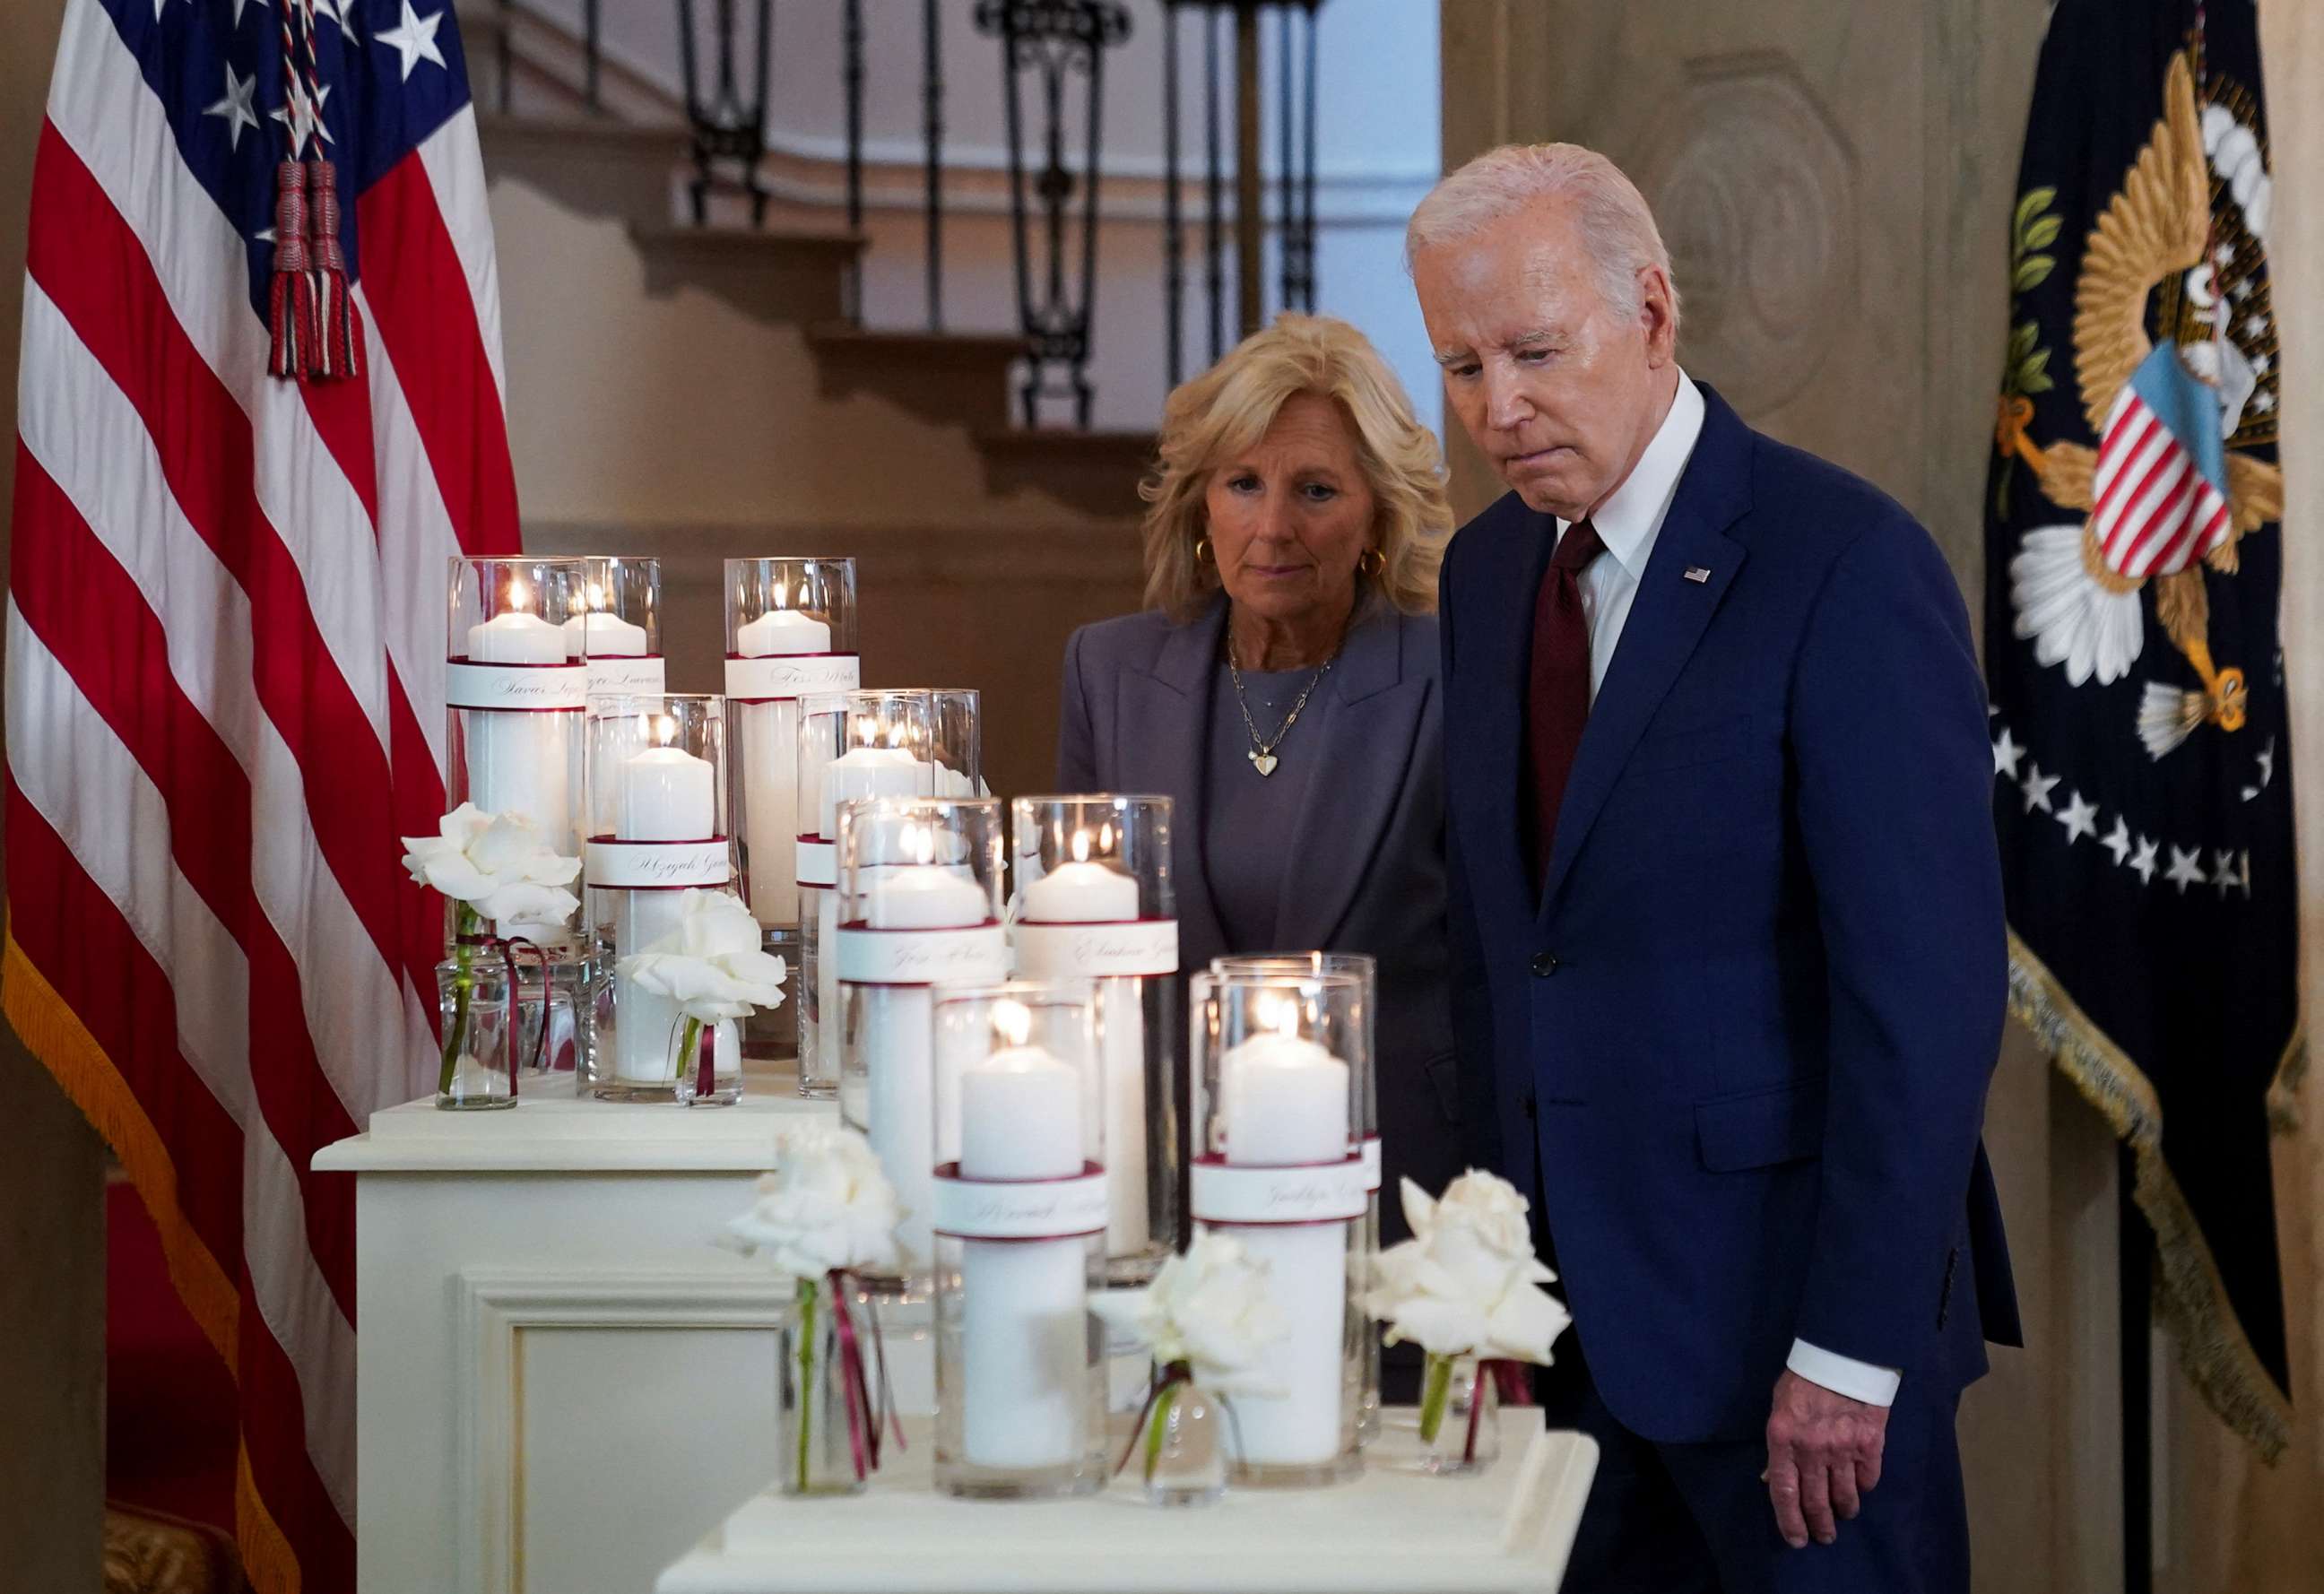 PHOTO: President Joe Biden and first lady Jill Biden pause to look at a display of candles a year after the school shooting at Robb Elementary School in Uvalde, Texas, during an event at the White House, May 24, 2023.